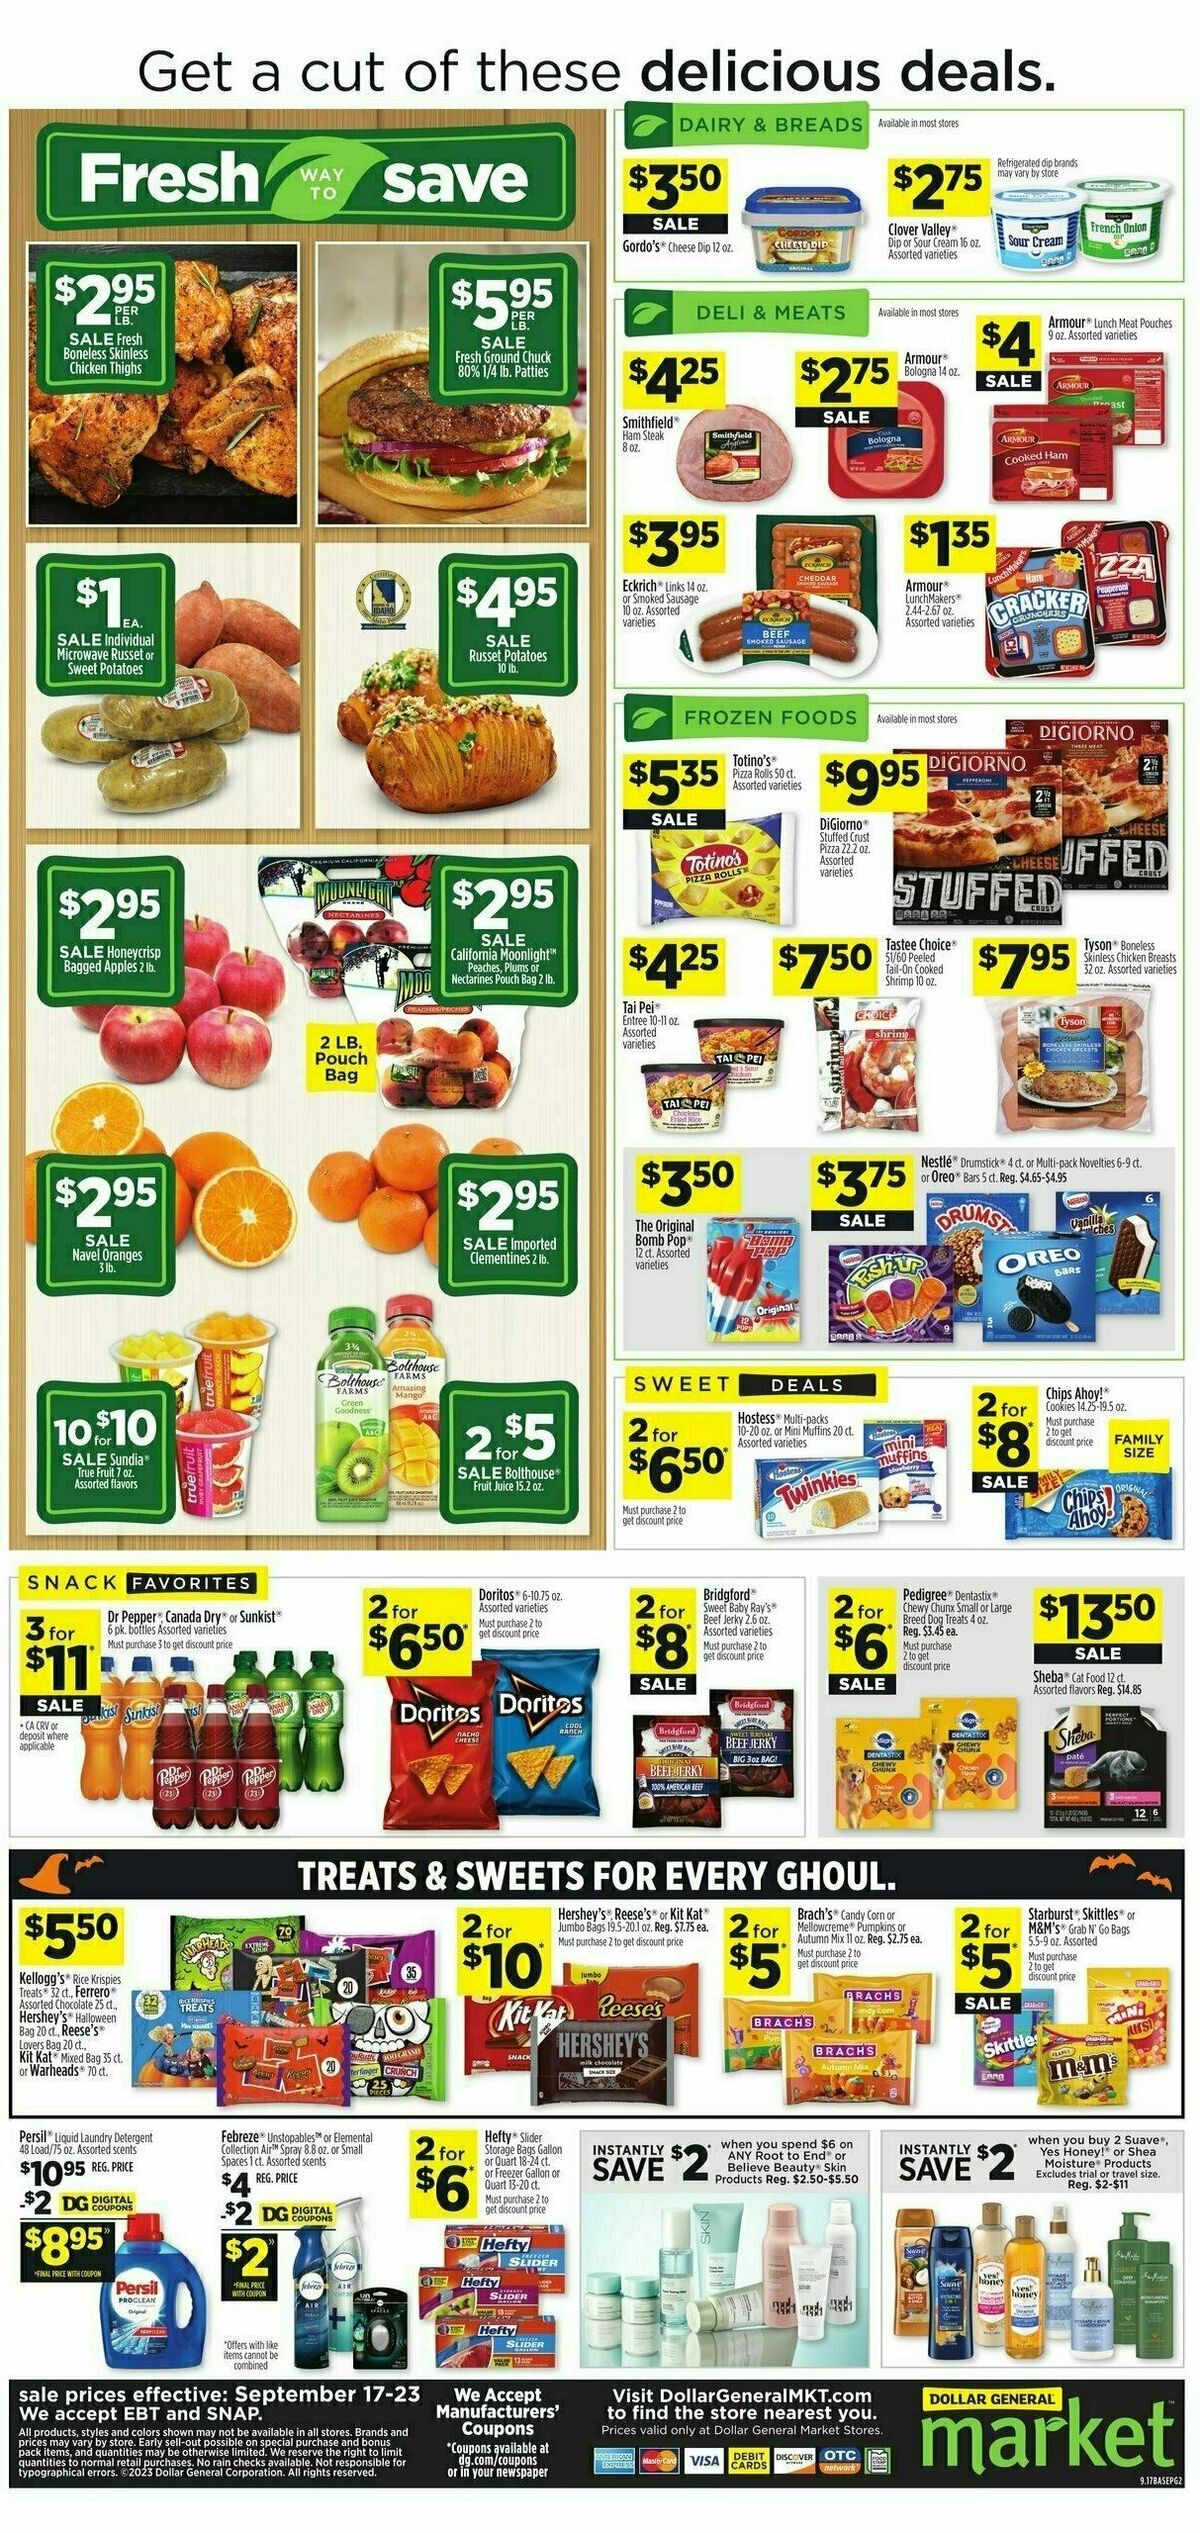 Dollar General Market Ad Weekly Ad from September 17